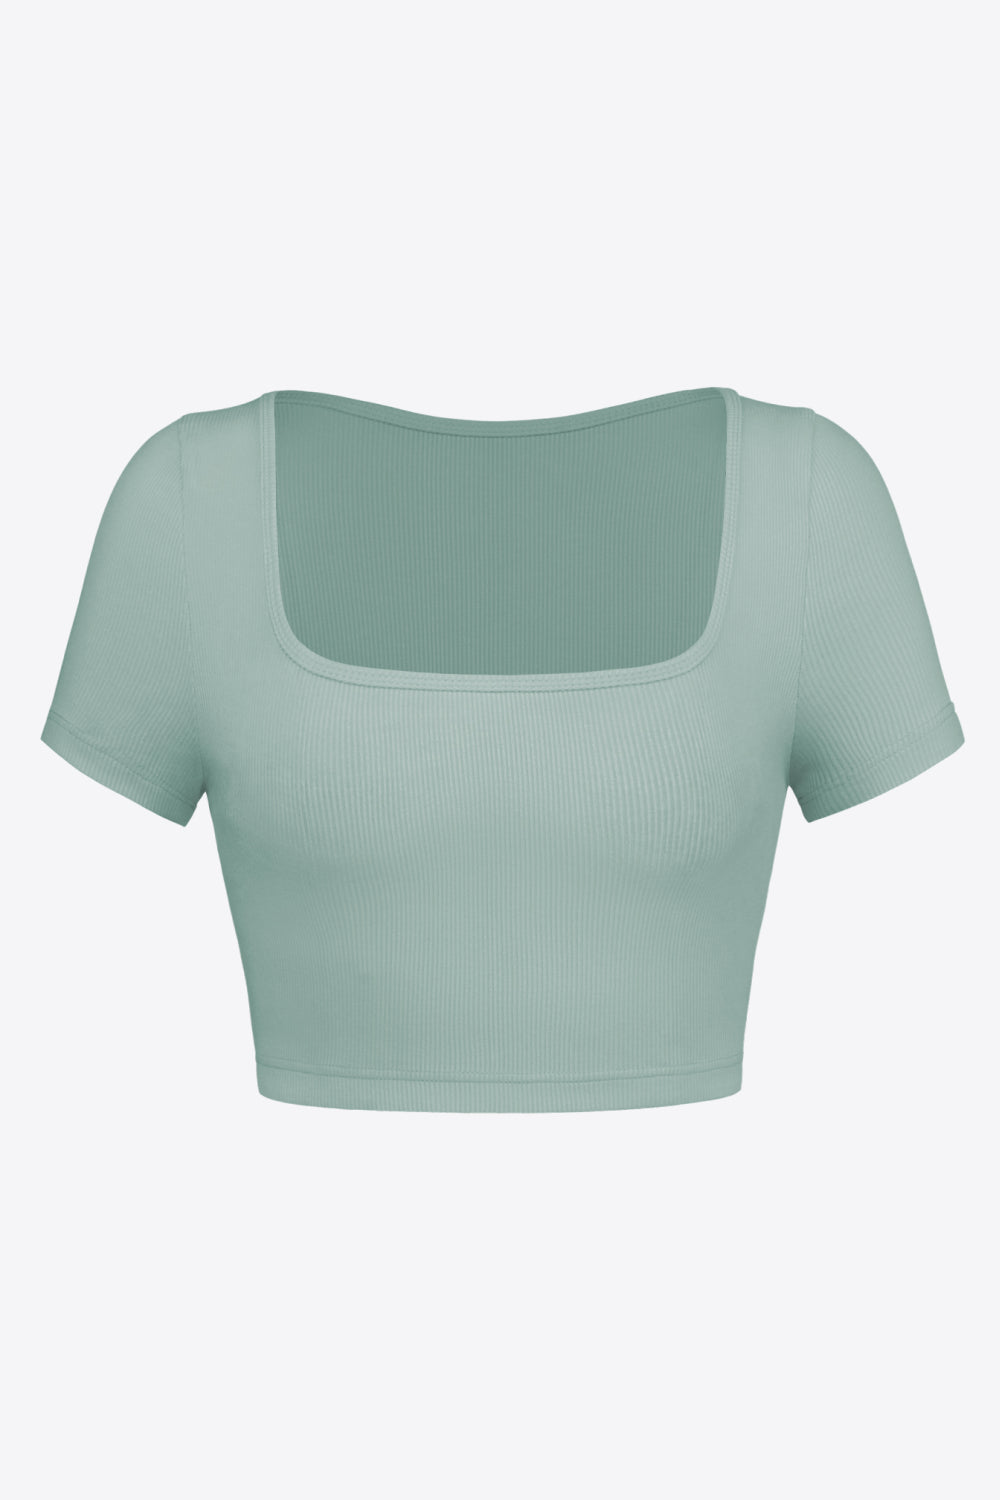 Square Neck Ribbed Crop Top - Women’s Clothing & Accessories - Shirts & Tops - 5 - 2024